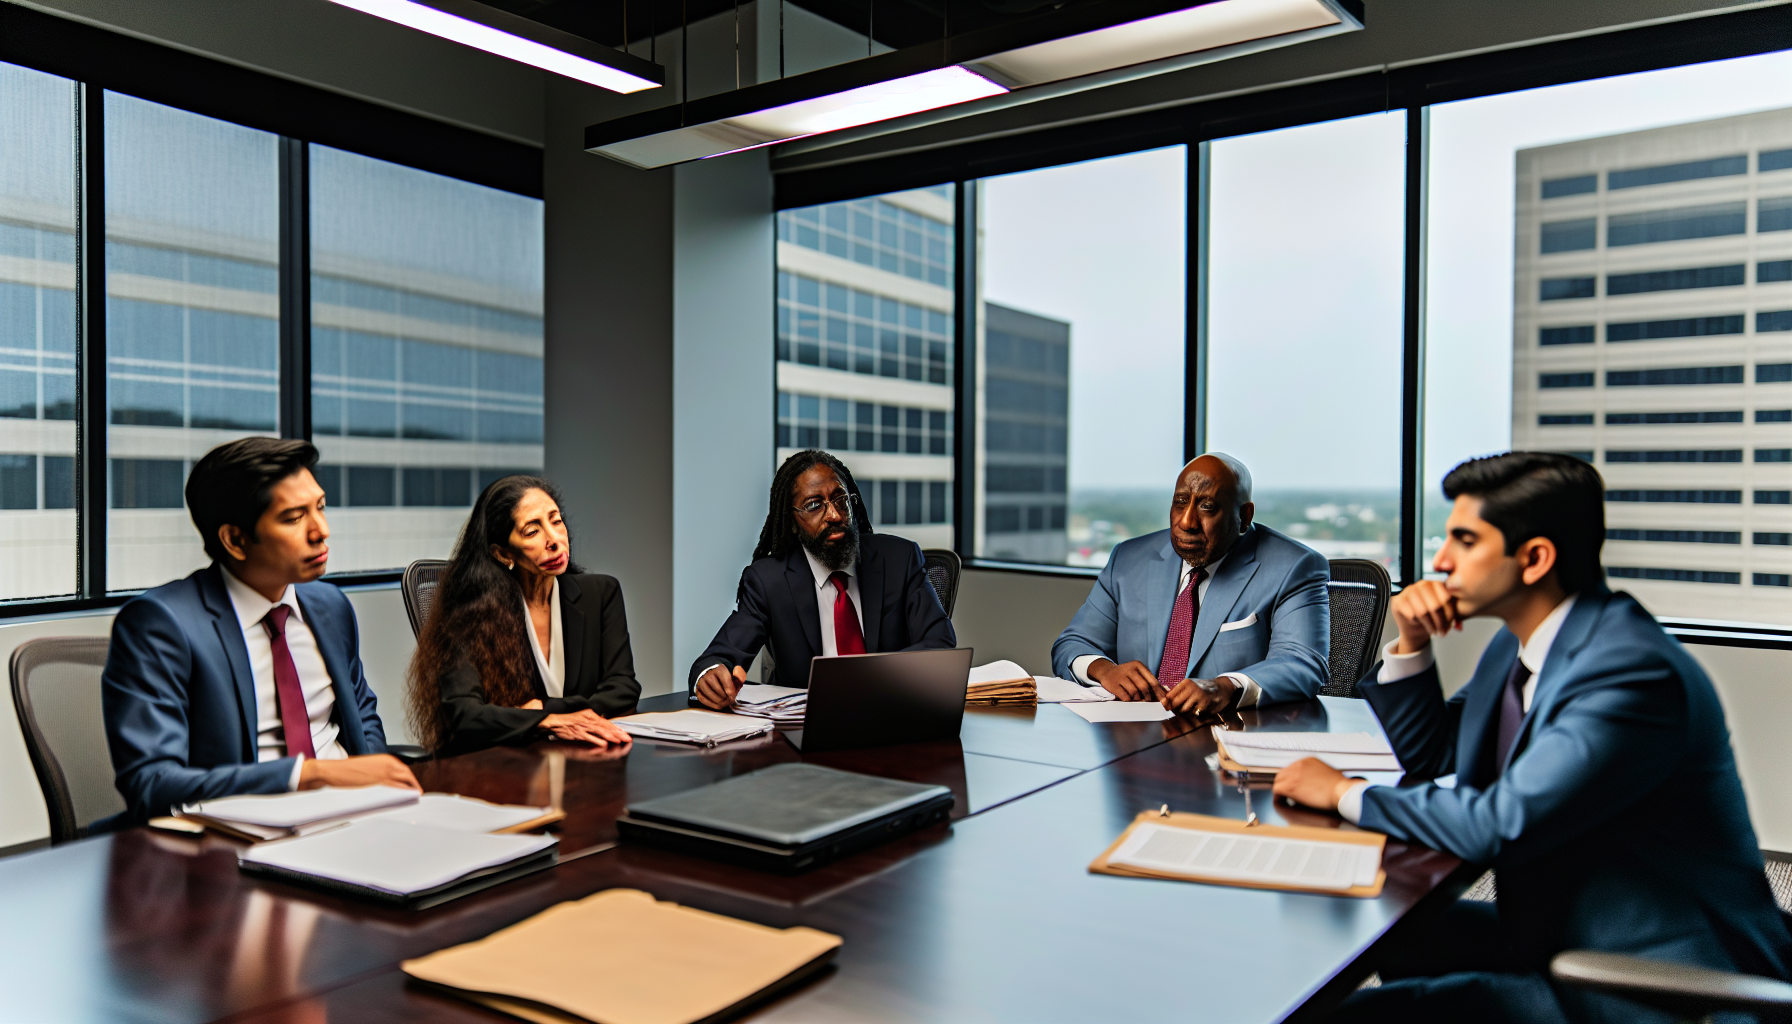 A diverse team of lawyers discussing growth strategies for a law firm